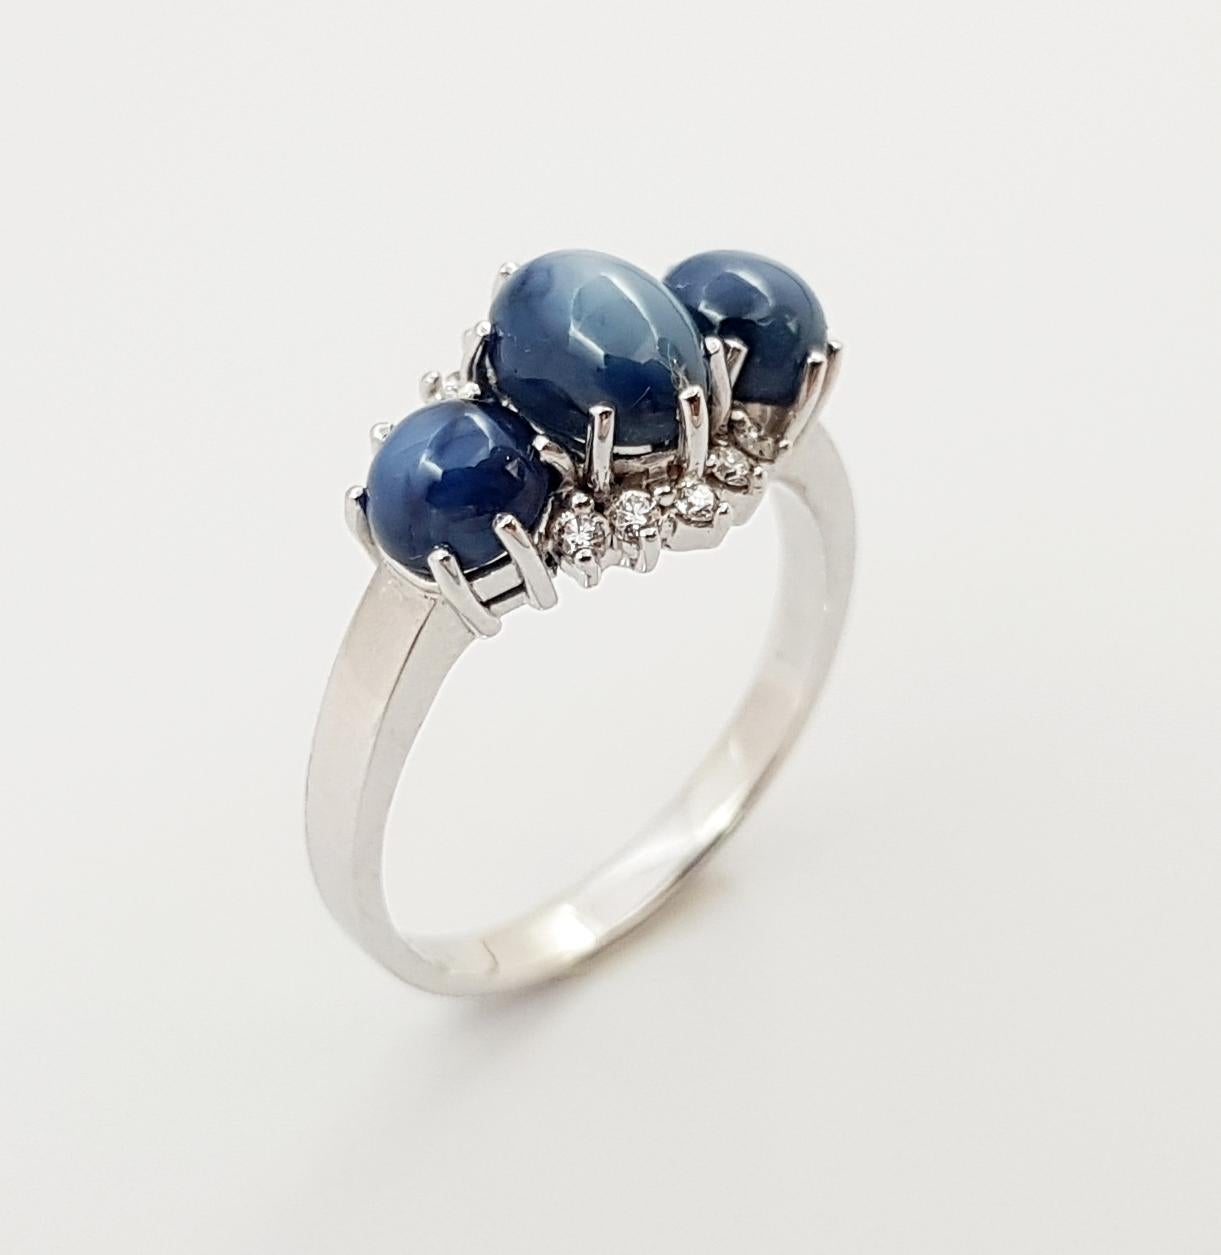 Cabochon Blue Star Sapphire with Diamond Ring Set in 18 Karat White Gold Settings For Sale